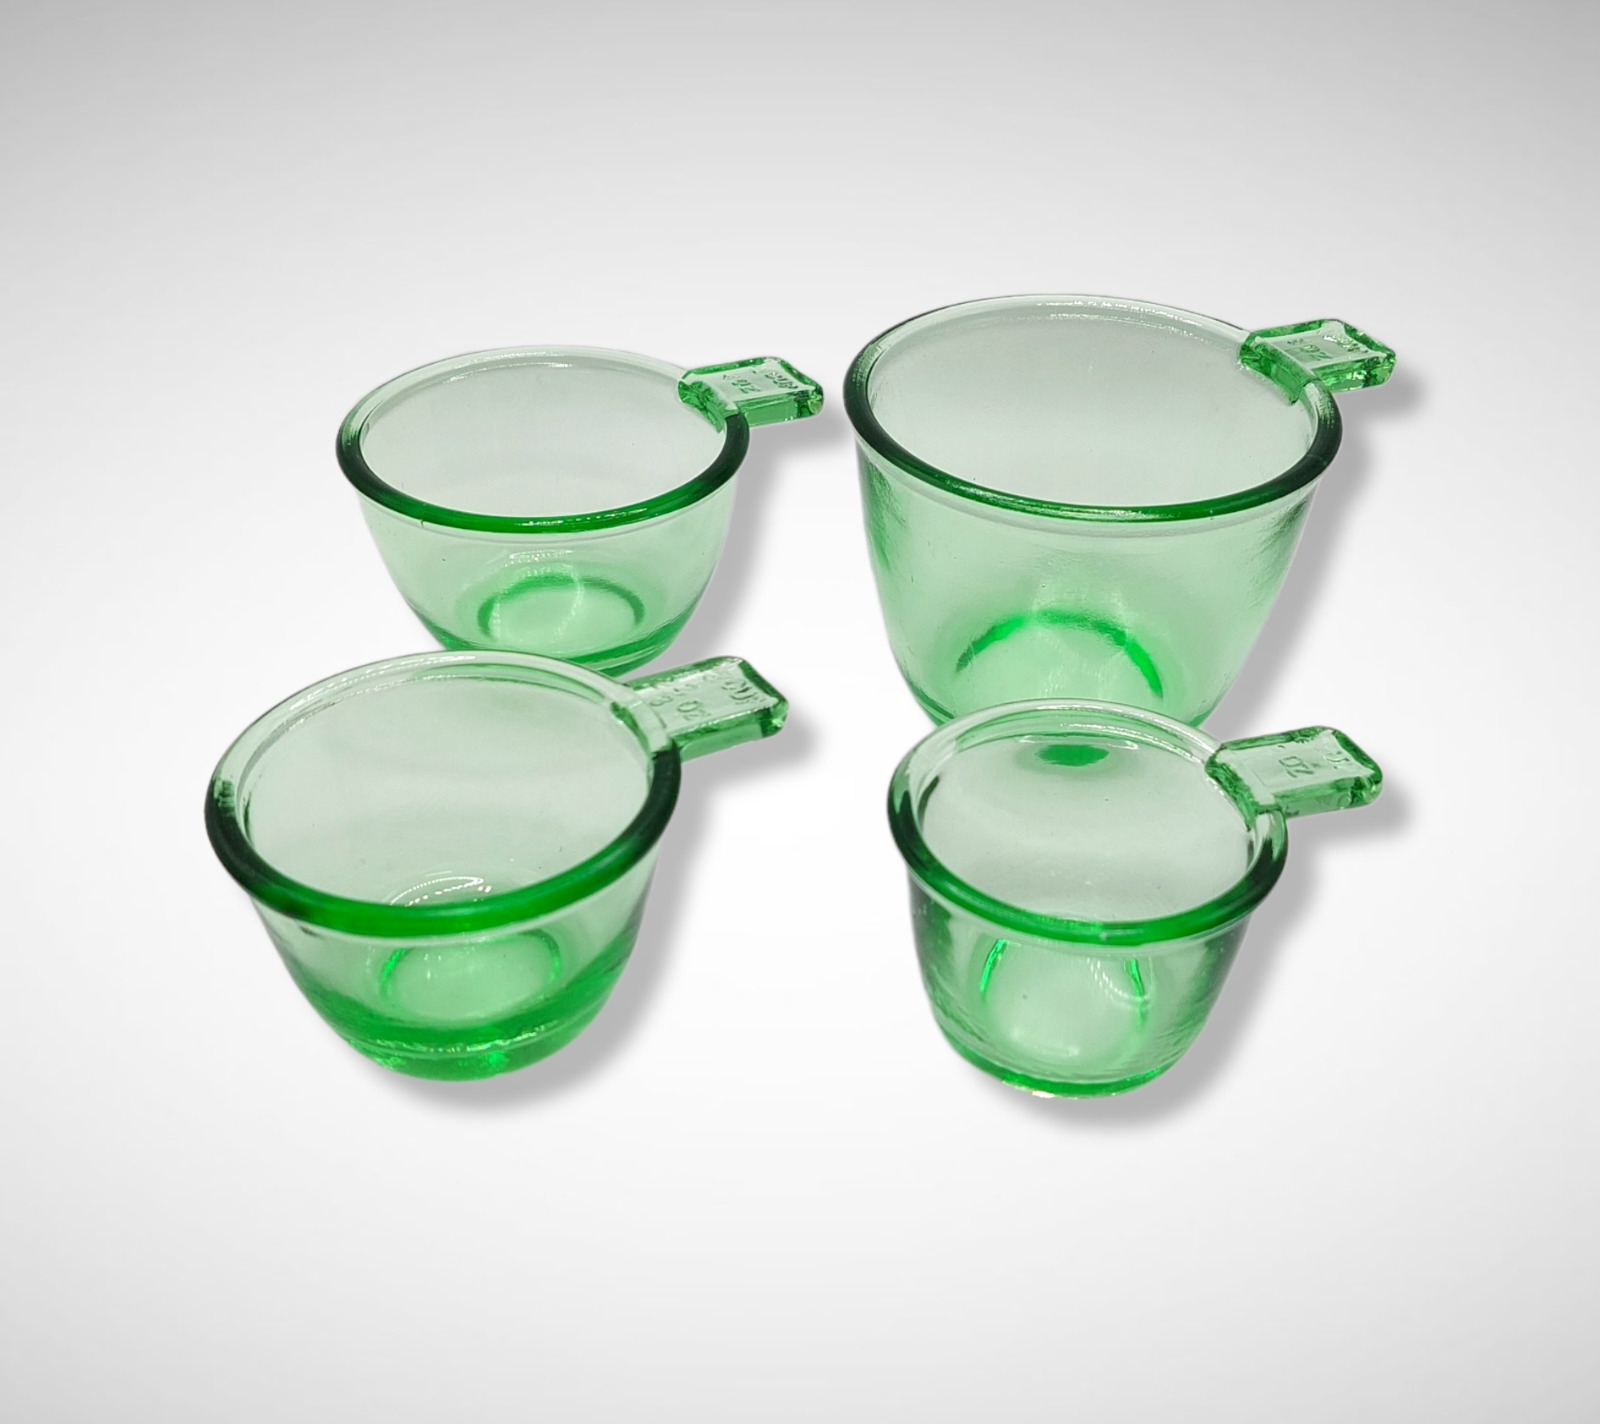 GREEN DEPRESSION STYLE GLASS 4 PC NESTING MEASURING CUP SET, Vintage, Bowl, Dish